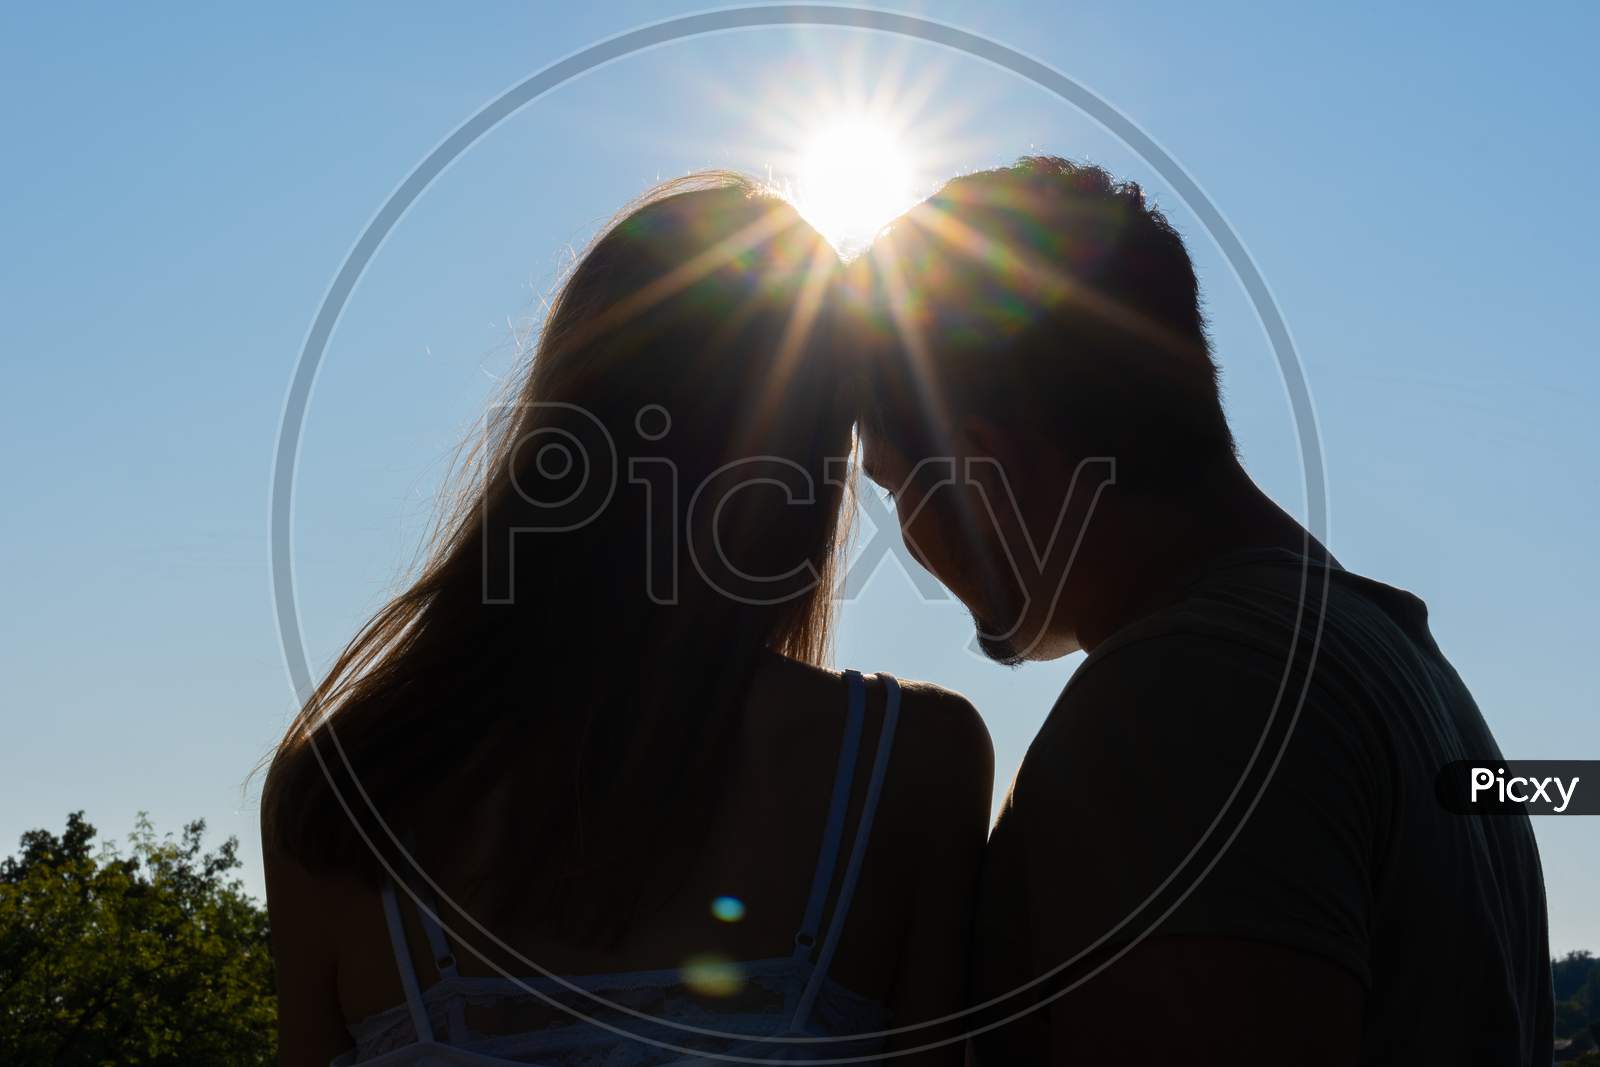 Silhouette Of dreaming Couple Against Deep Blue Sky With Sunbeams. Low Angle View, Concept.